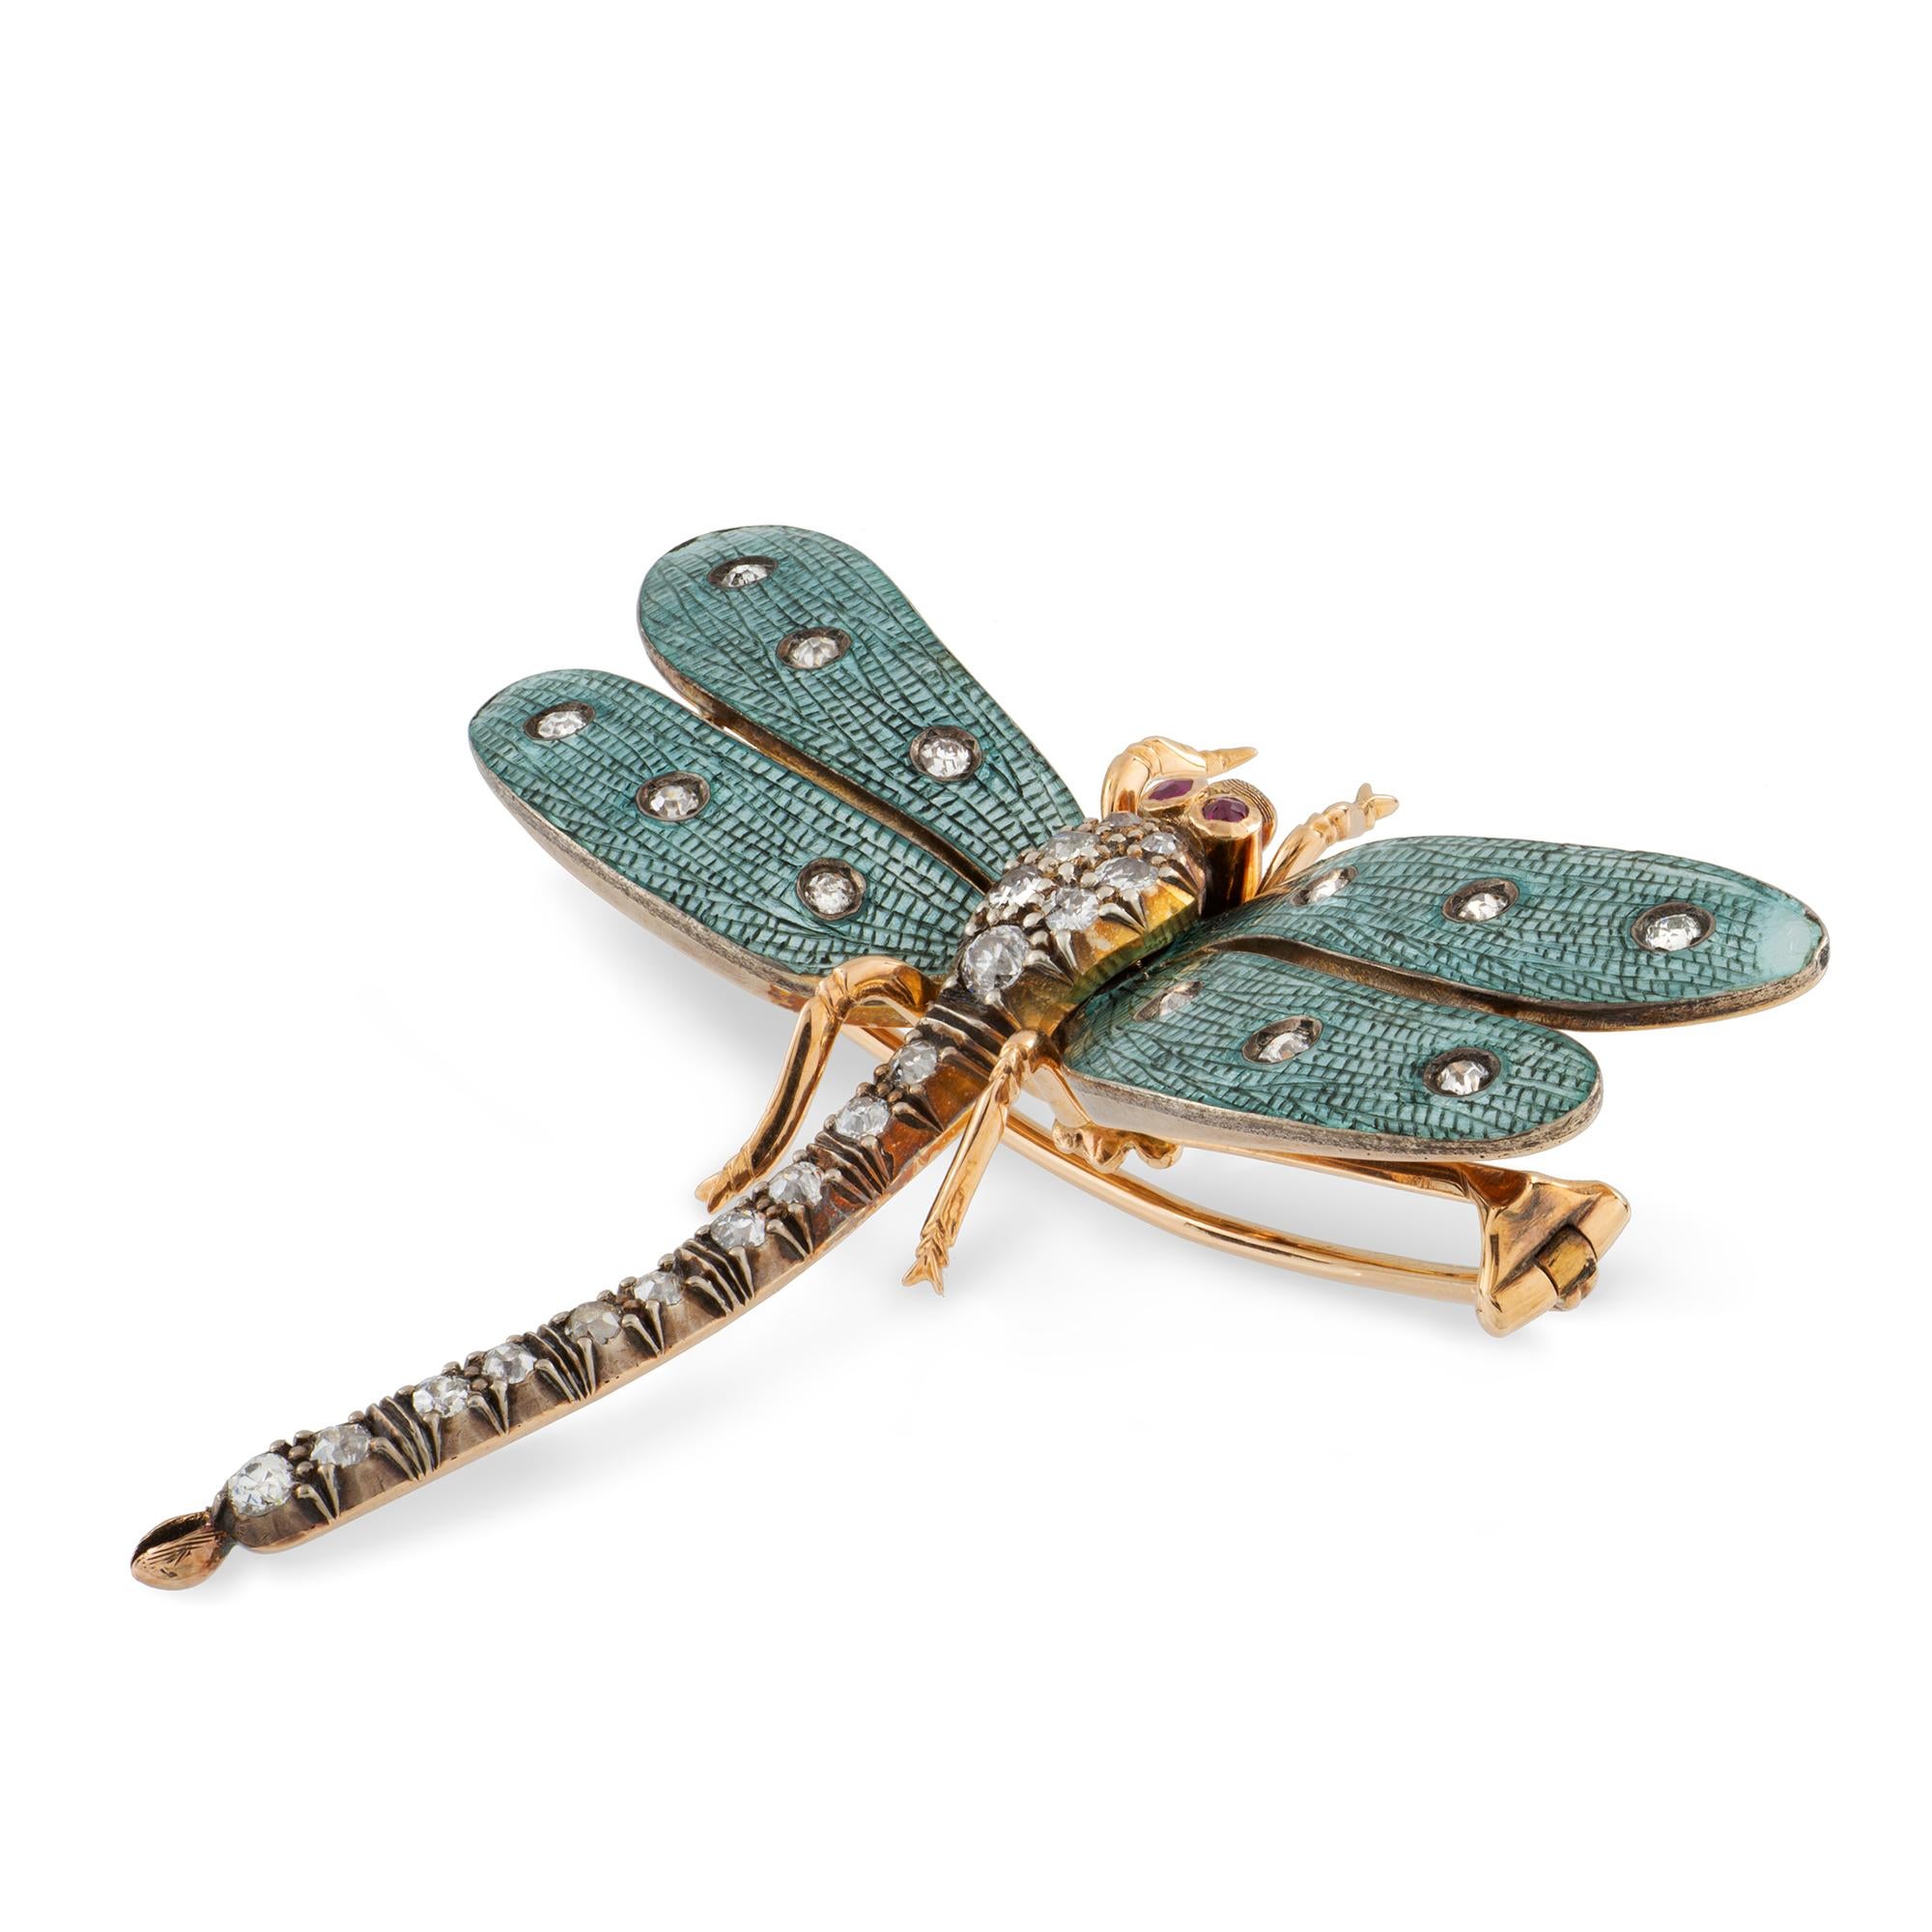 A Victorian dragonfly brooch, the two pairs of wings of blue enamel with veined decoration, each set with three old-cut diamonds, all set to a yellow gold mount, wing span measuring approximately 5.5cm, the body and delicately curved tail encrusted